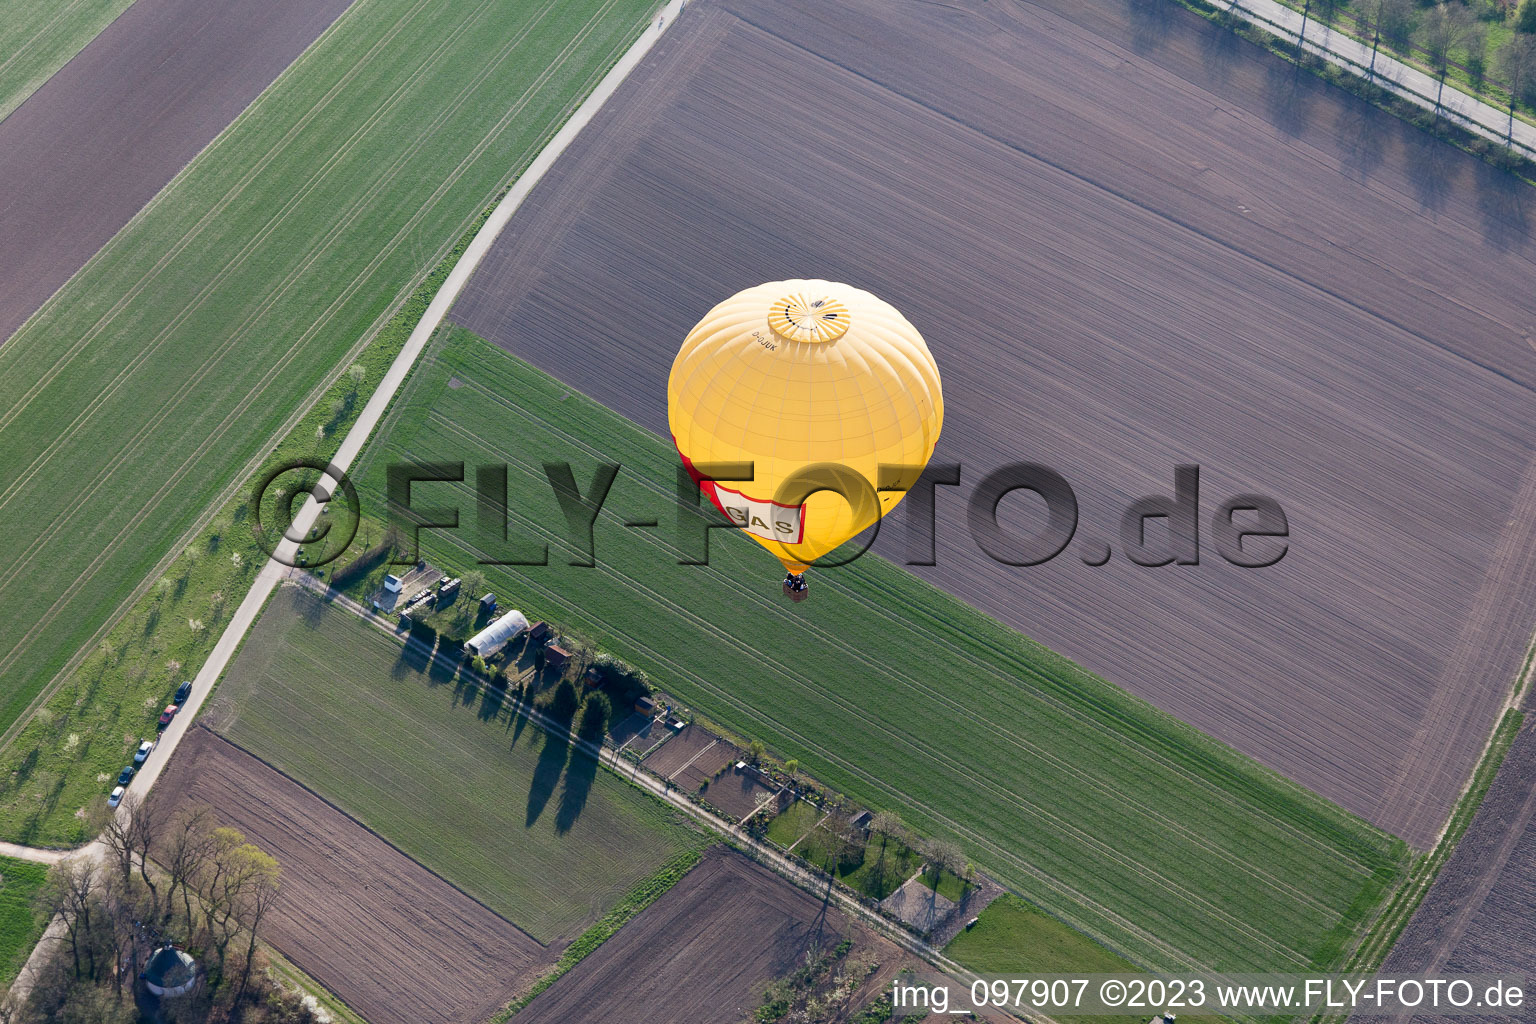 Aerial view of Balloon launch in the district Hayna in Herxheim bei Landau/Pfalz in the state Rhineland-Palatinate, Germany